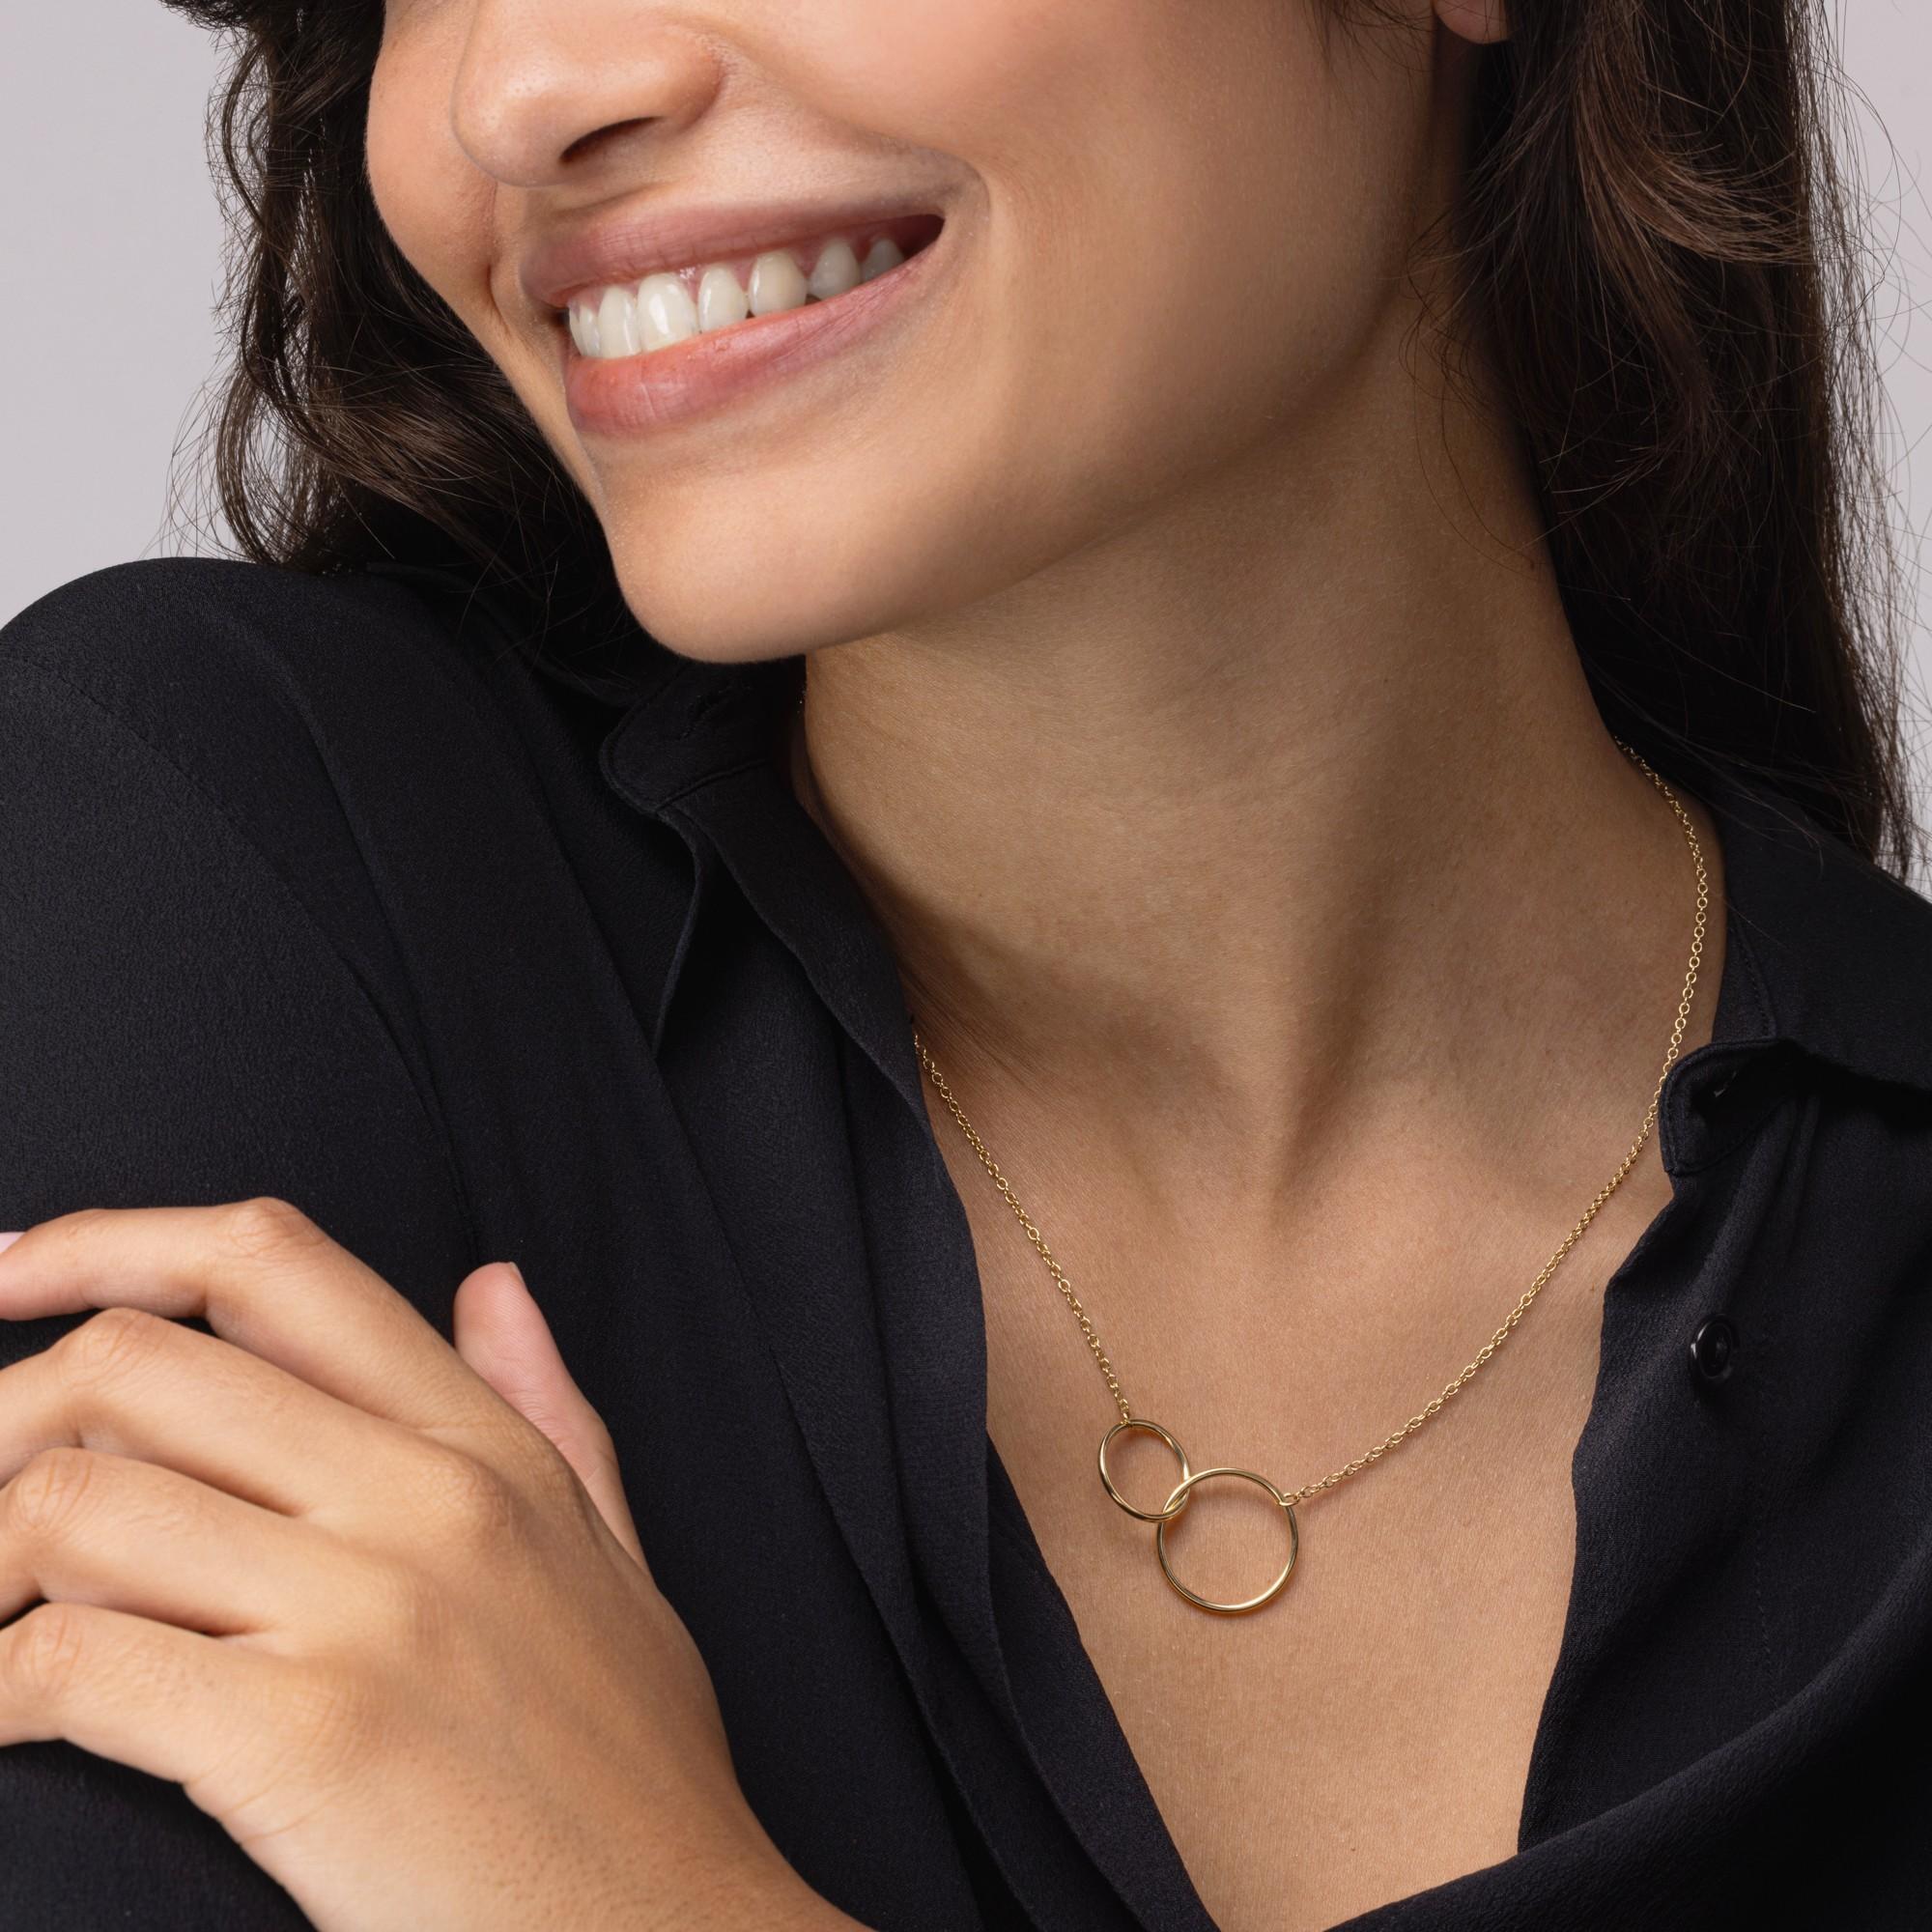 Alex Jona design collection, hand crafted in Italy, 18 karat yellow gold interlocking hoop chain necklace.

Alex Jona jewels stand out, not only for their special design and for the excellent quality of the gemstones, but also for the careful